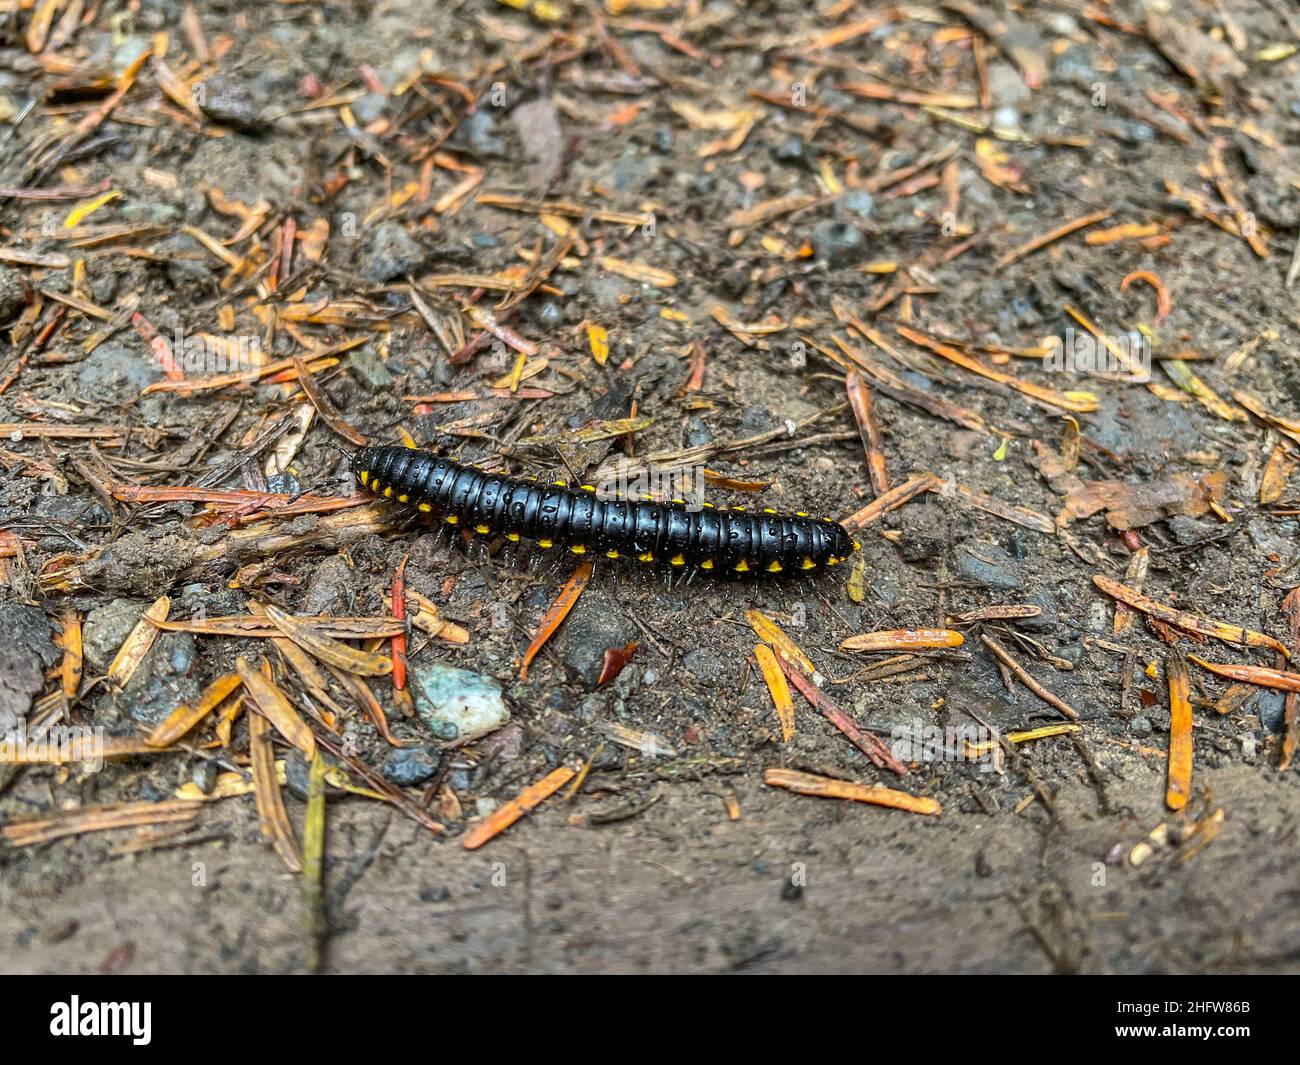 Yellow-spotted millipede (Harpaphe haydeniana) is a species of polydesmidan ('flat-backed') millipede found in the moist forests along the Pacific coa Stock Photo